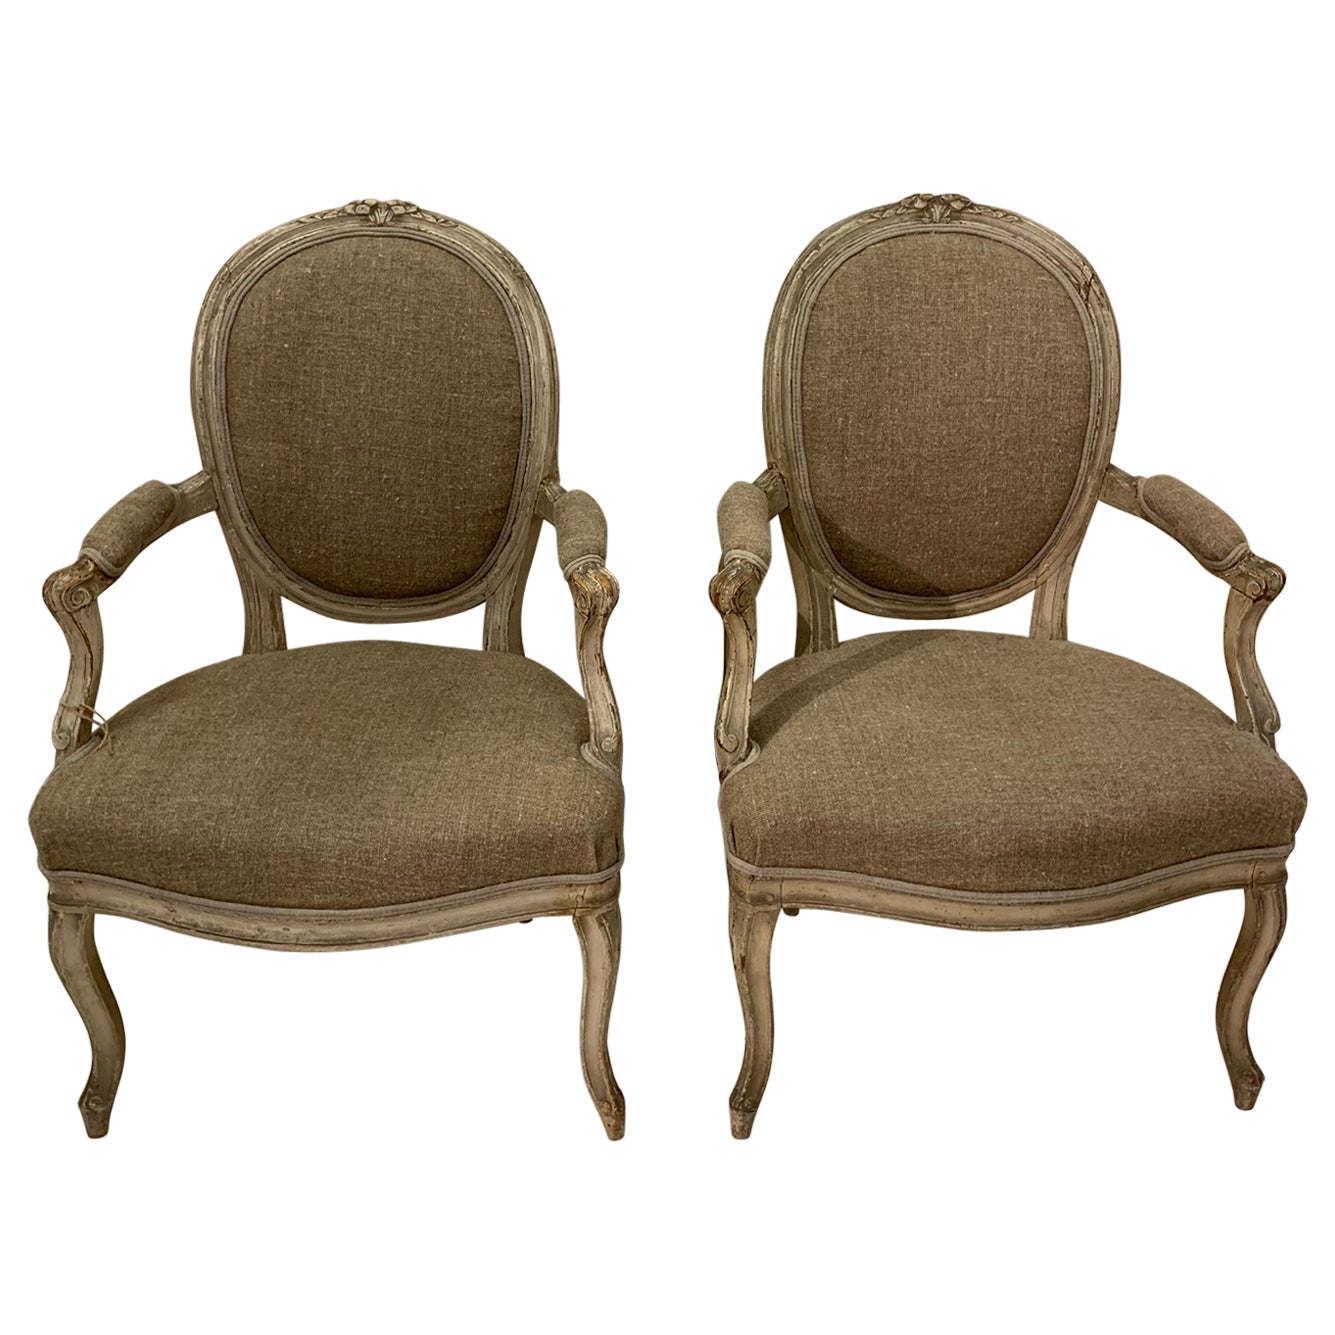 Pair of 19th Century French Fauteuils Louis XVI Style Upholstered Armchairs For Sale